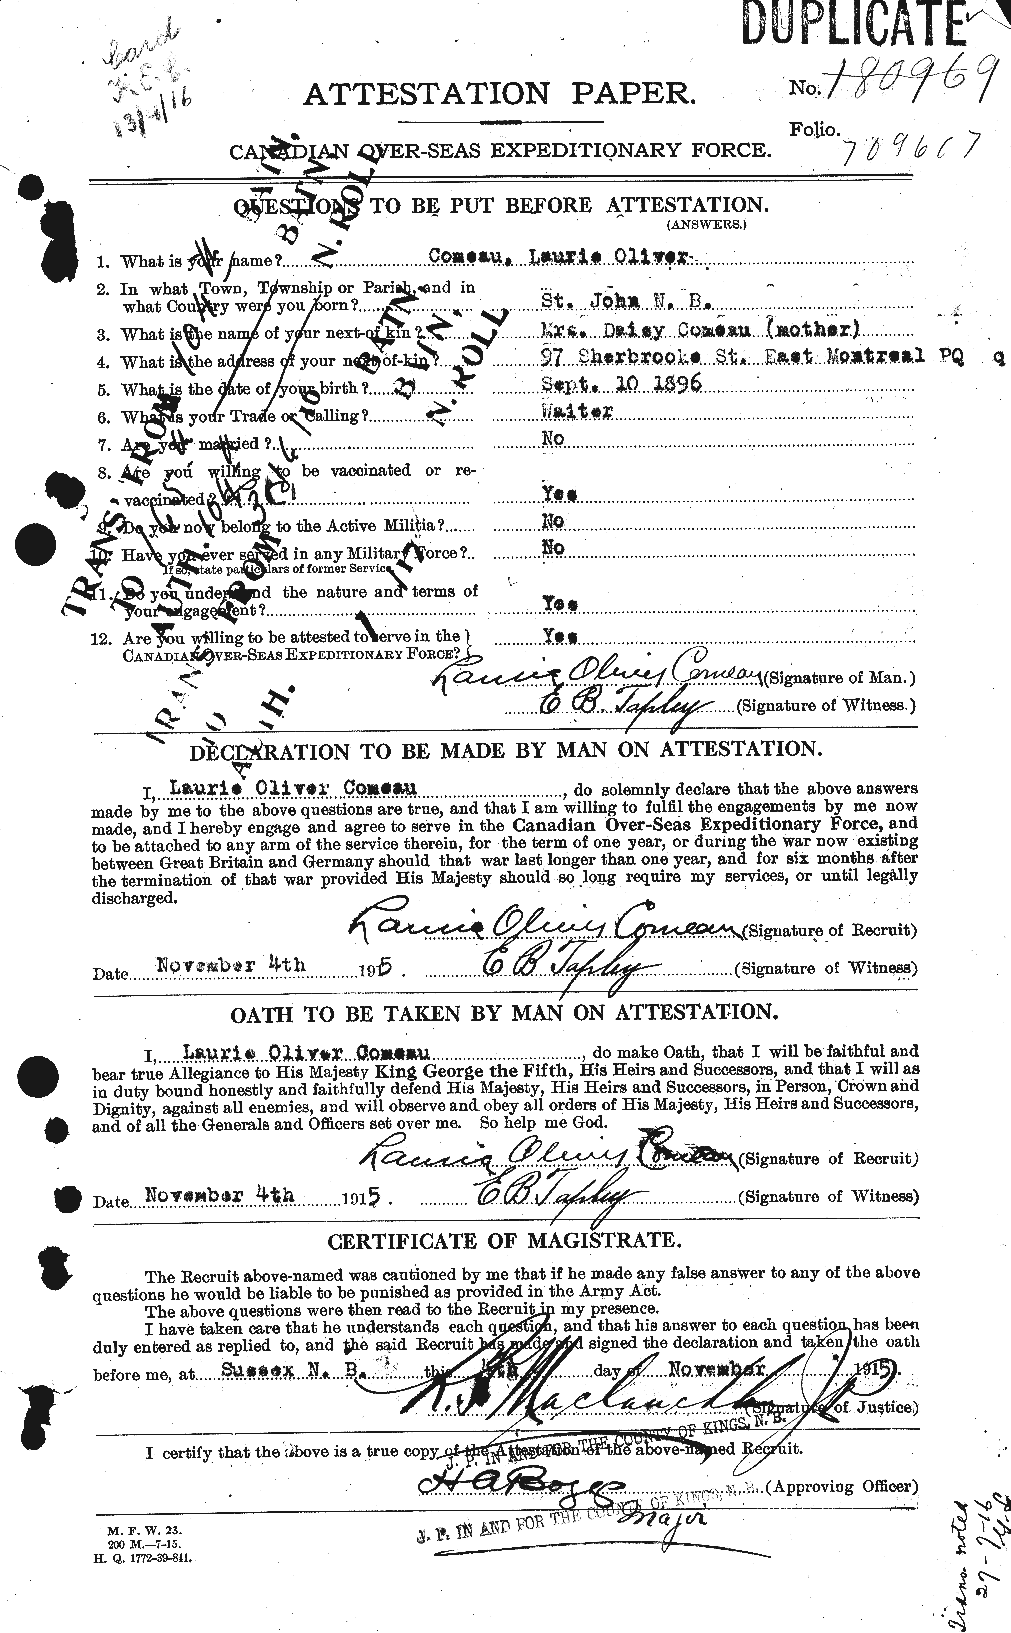 Personnel Records of the First World War - CEF 069587a